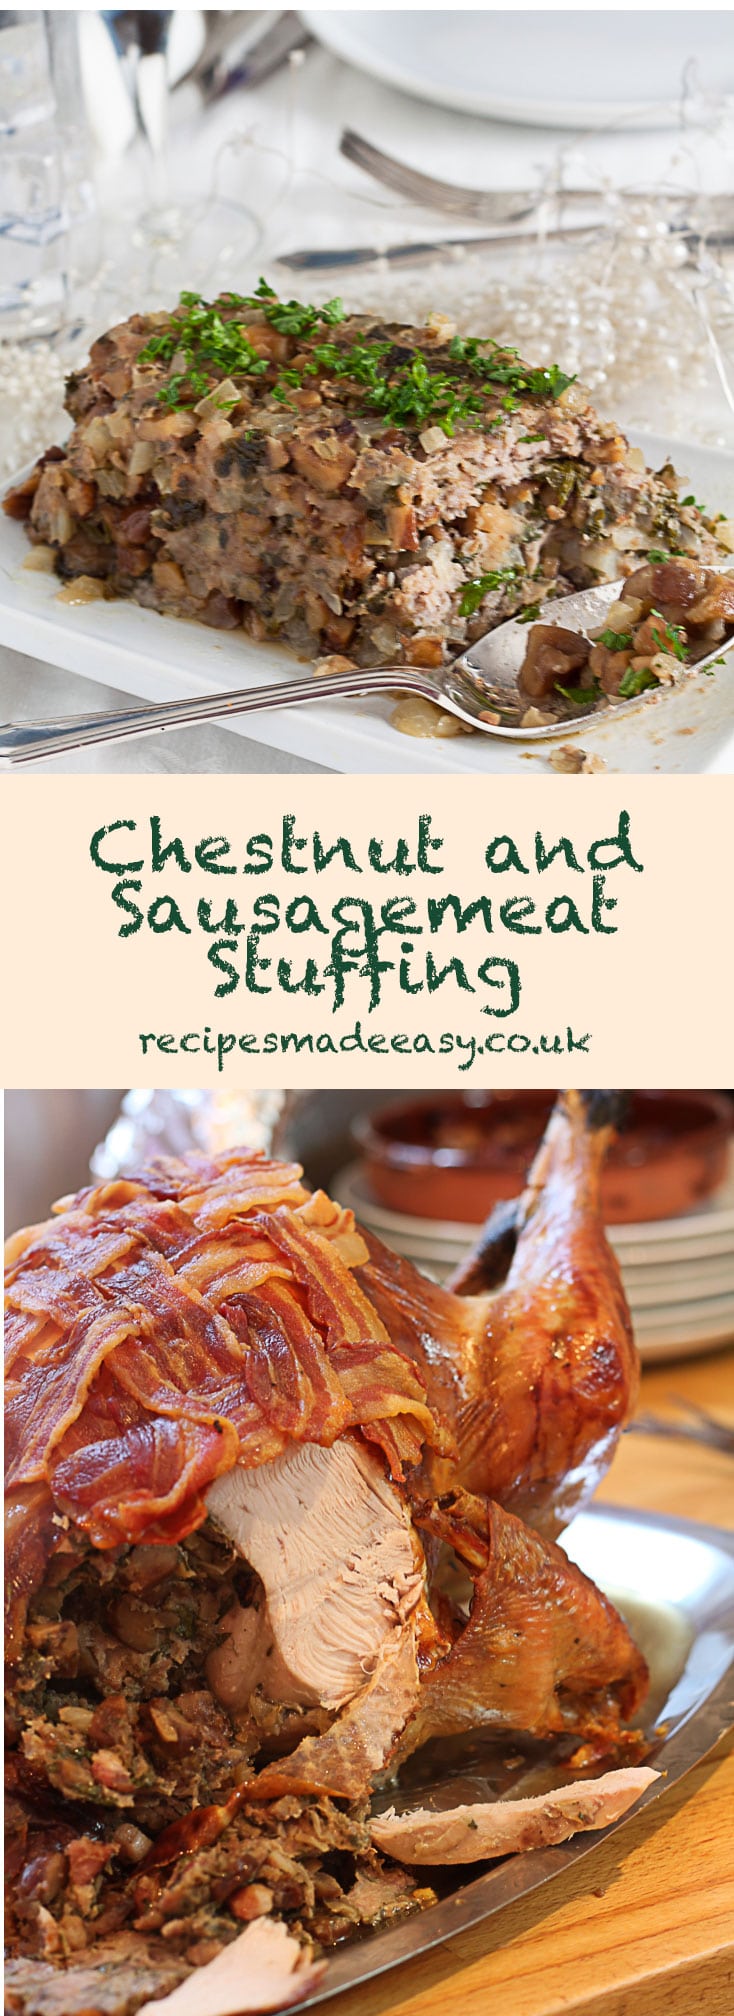 Chestnut and Sausagemeat Stuffing | Recipes Made Easy